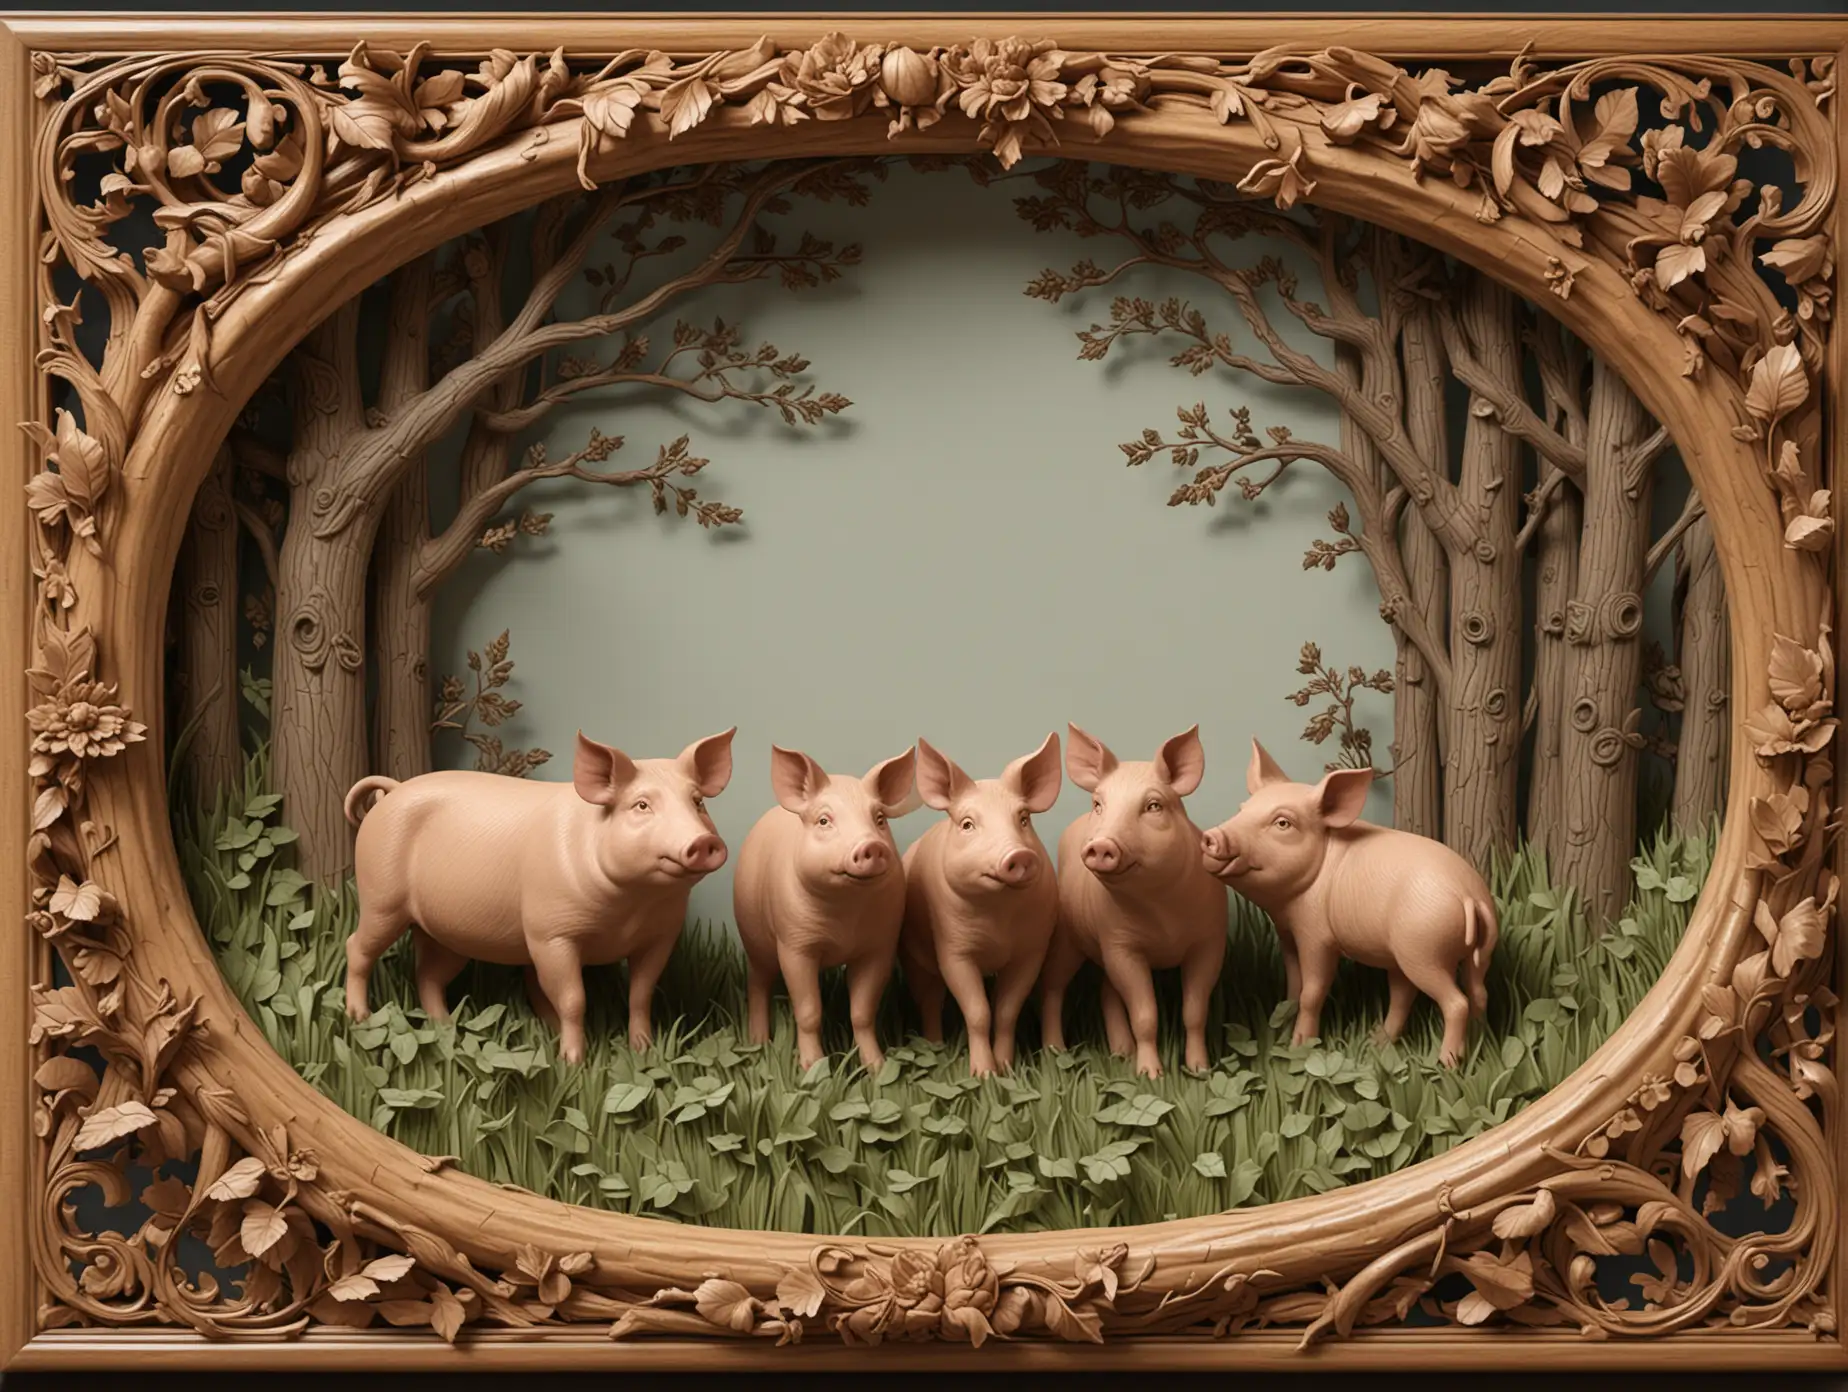 3d and tilable wood lacquer frame surround, featuring a finely carved wooden scene from The Three Little Pigs in the style of Aubrey beardsley